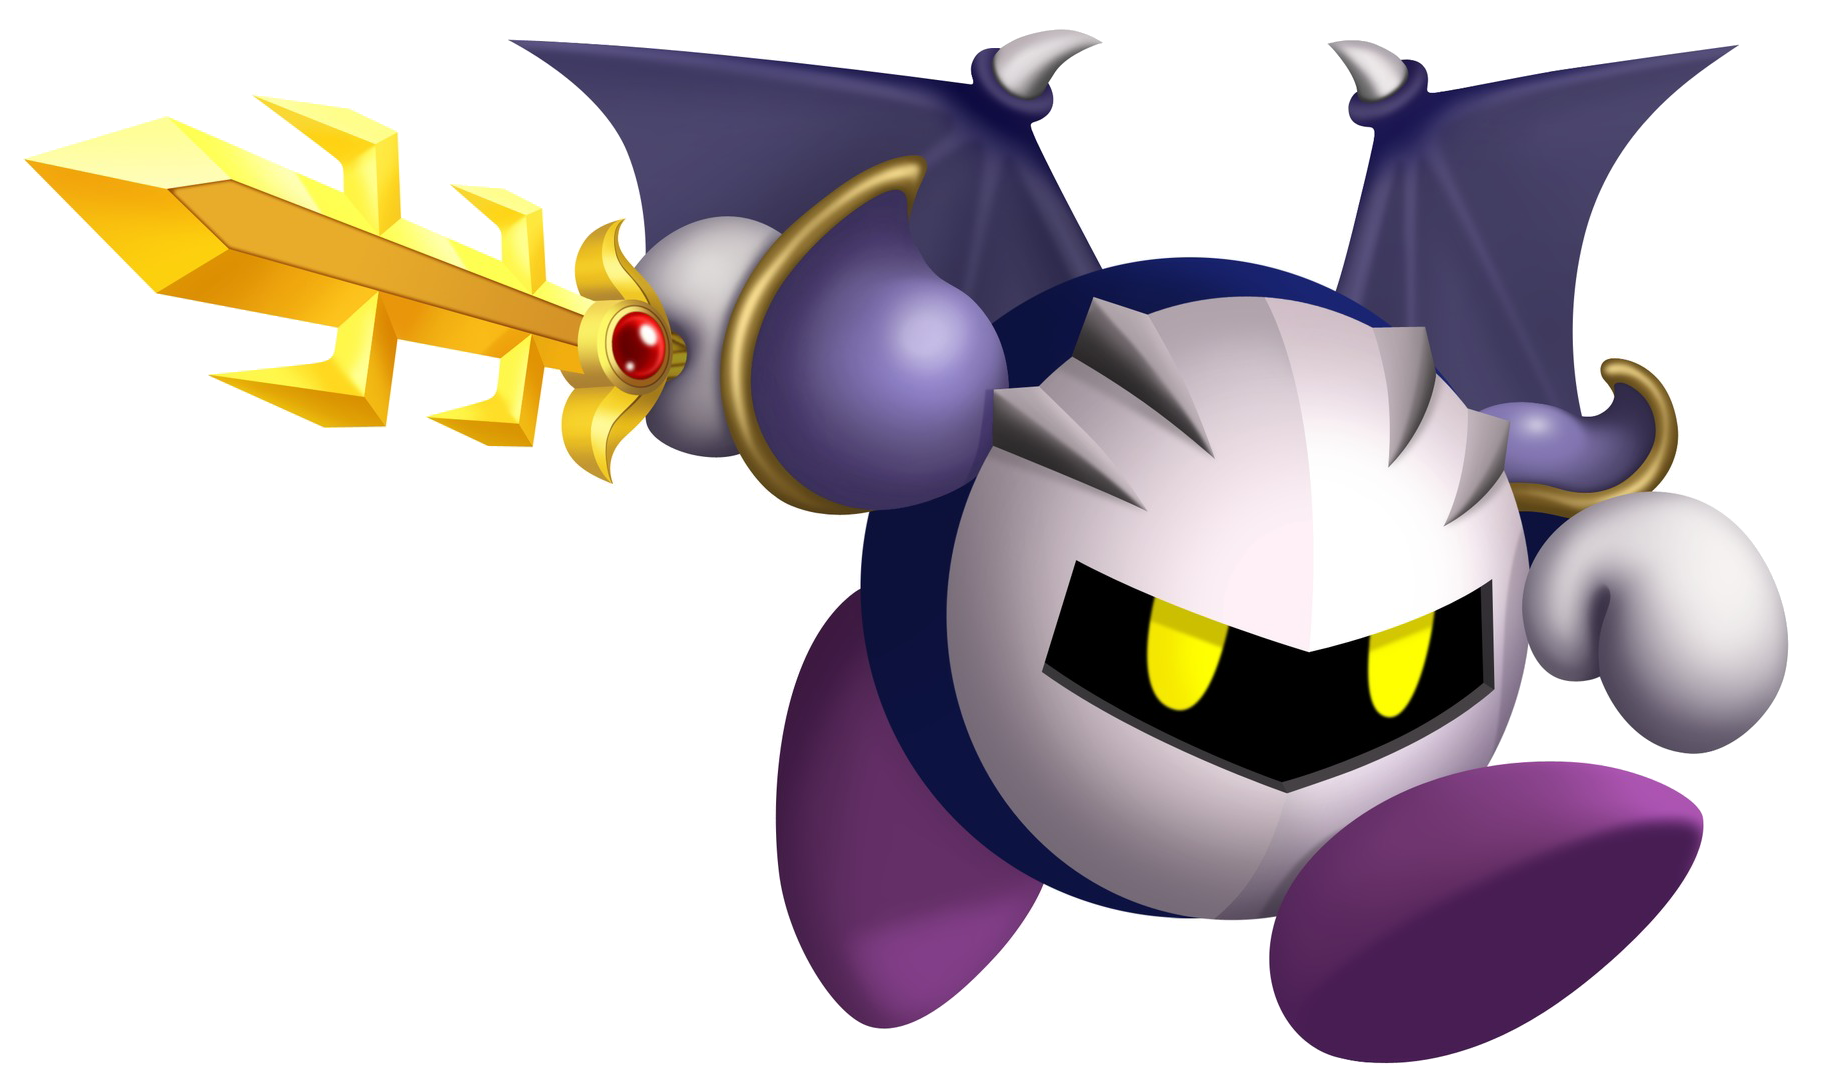 Meta knight games to play